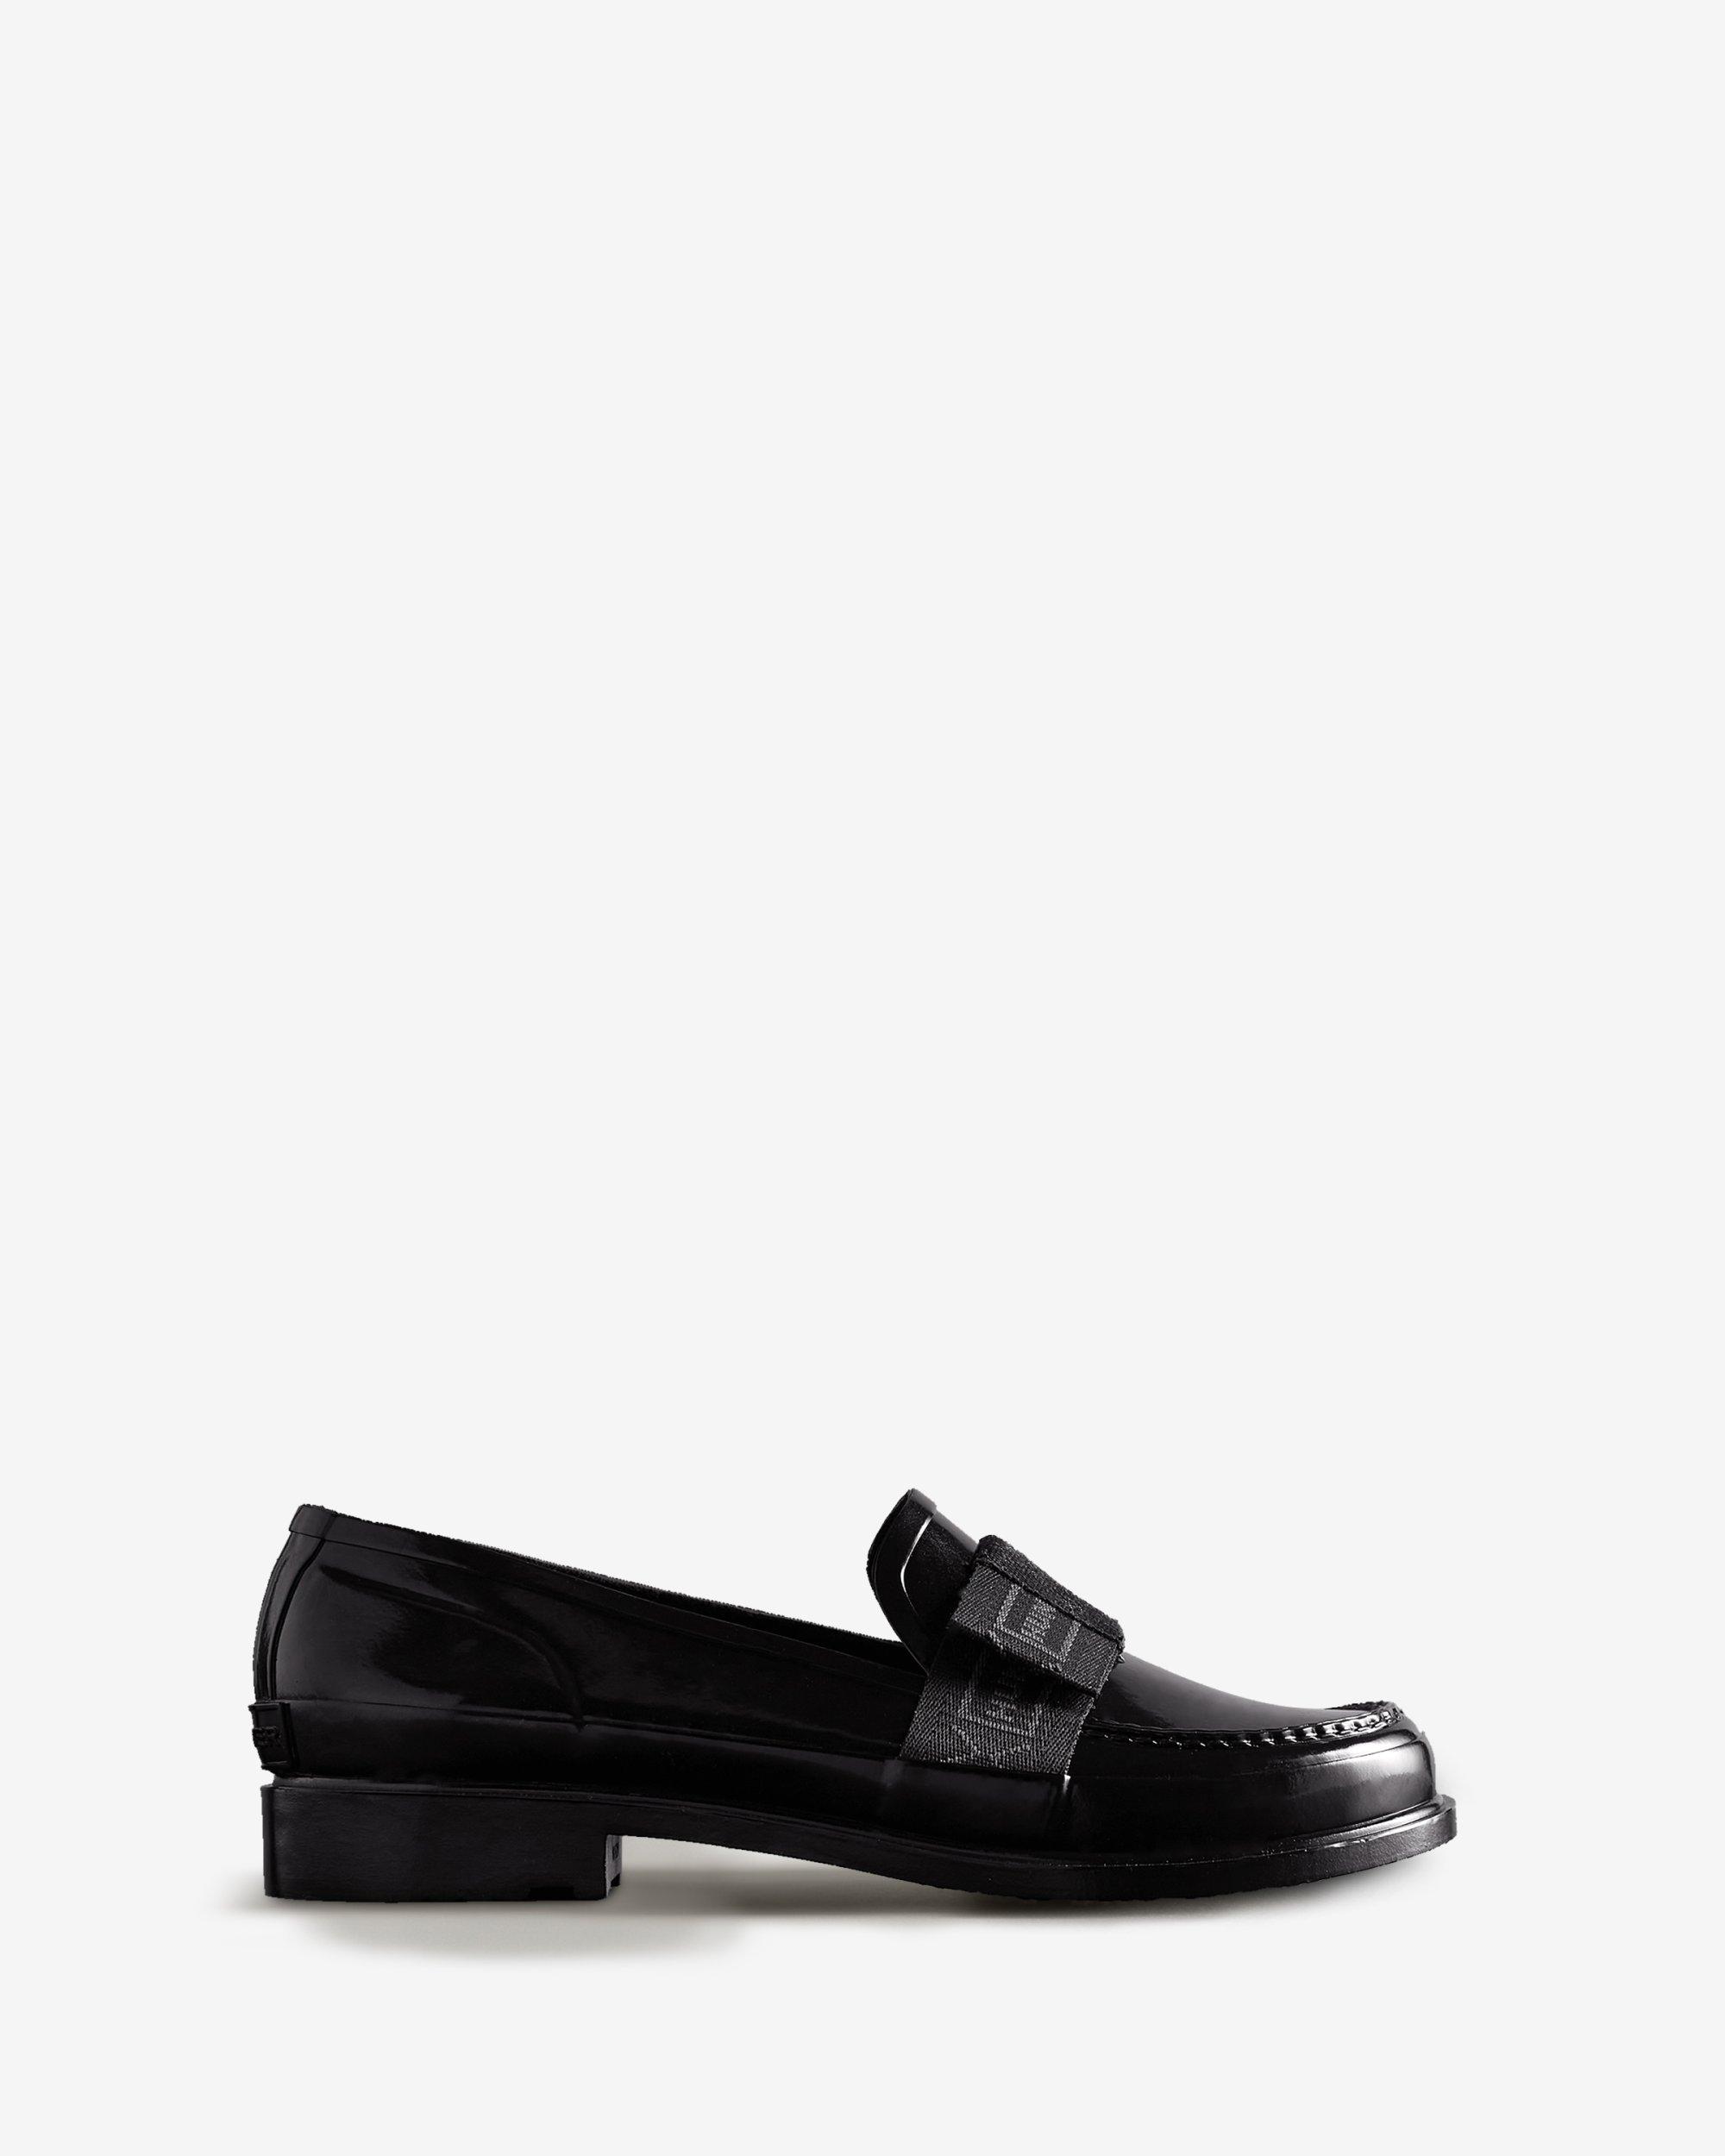 HUNTER Refined Slim Fit Bow Gloss Penny Loafers in Black | Lyst Australia